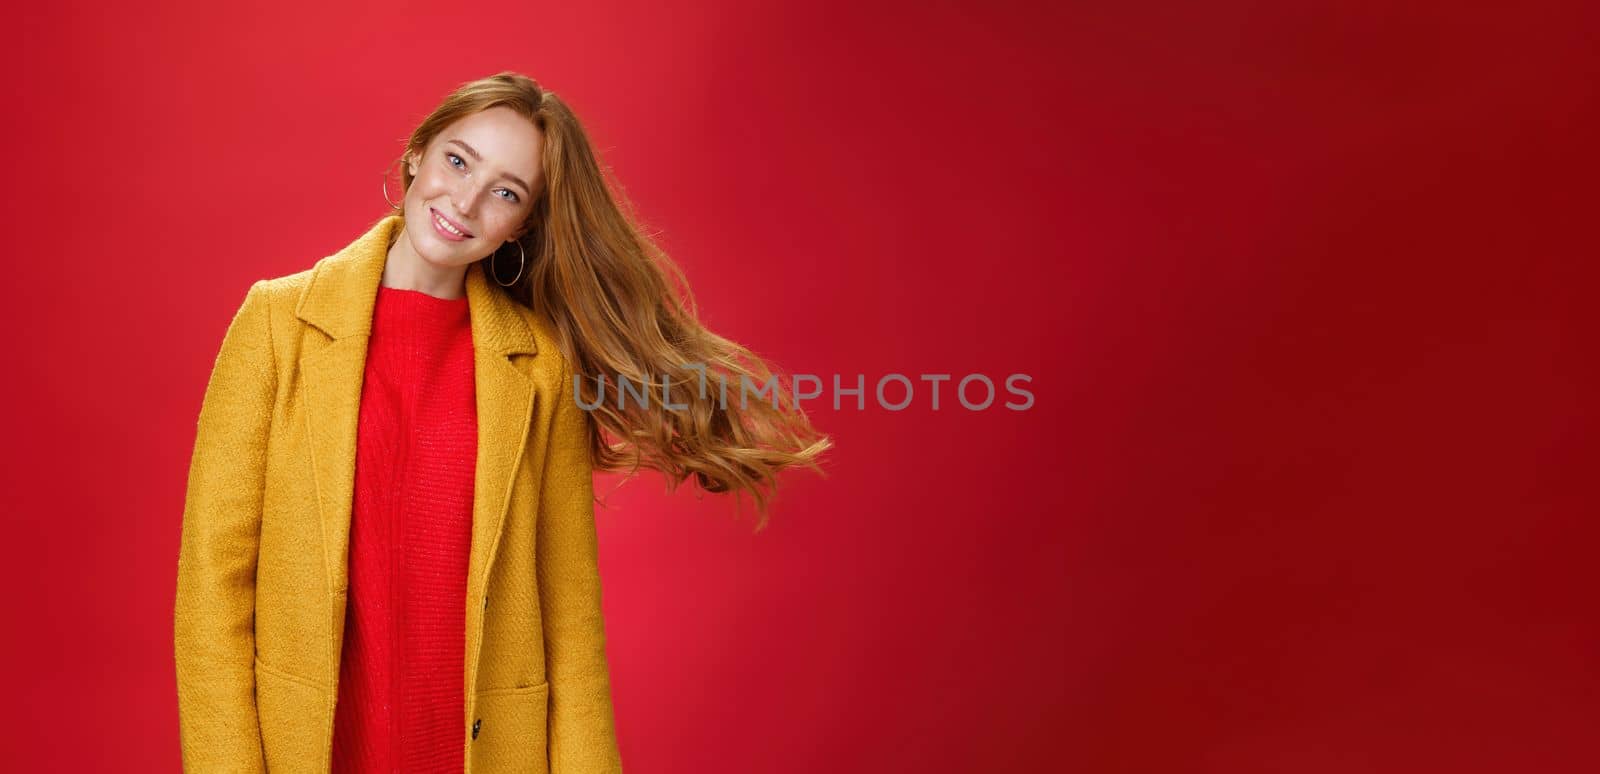 Charming redhead female with freckles waving hair smiling broadly tilting head as haircut flying in air posing delighted and carefree over red background in warm yellow coat and knitted dress by Benzoix